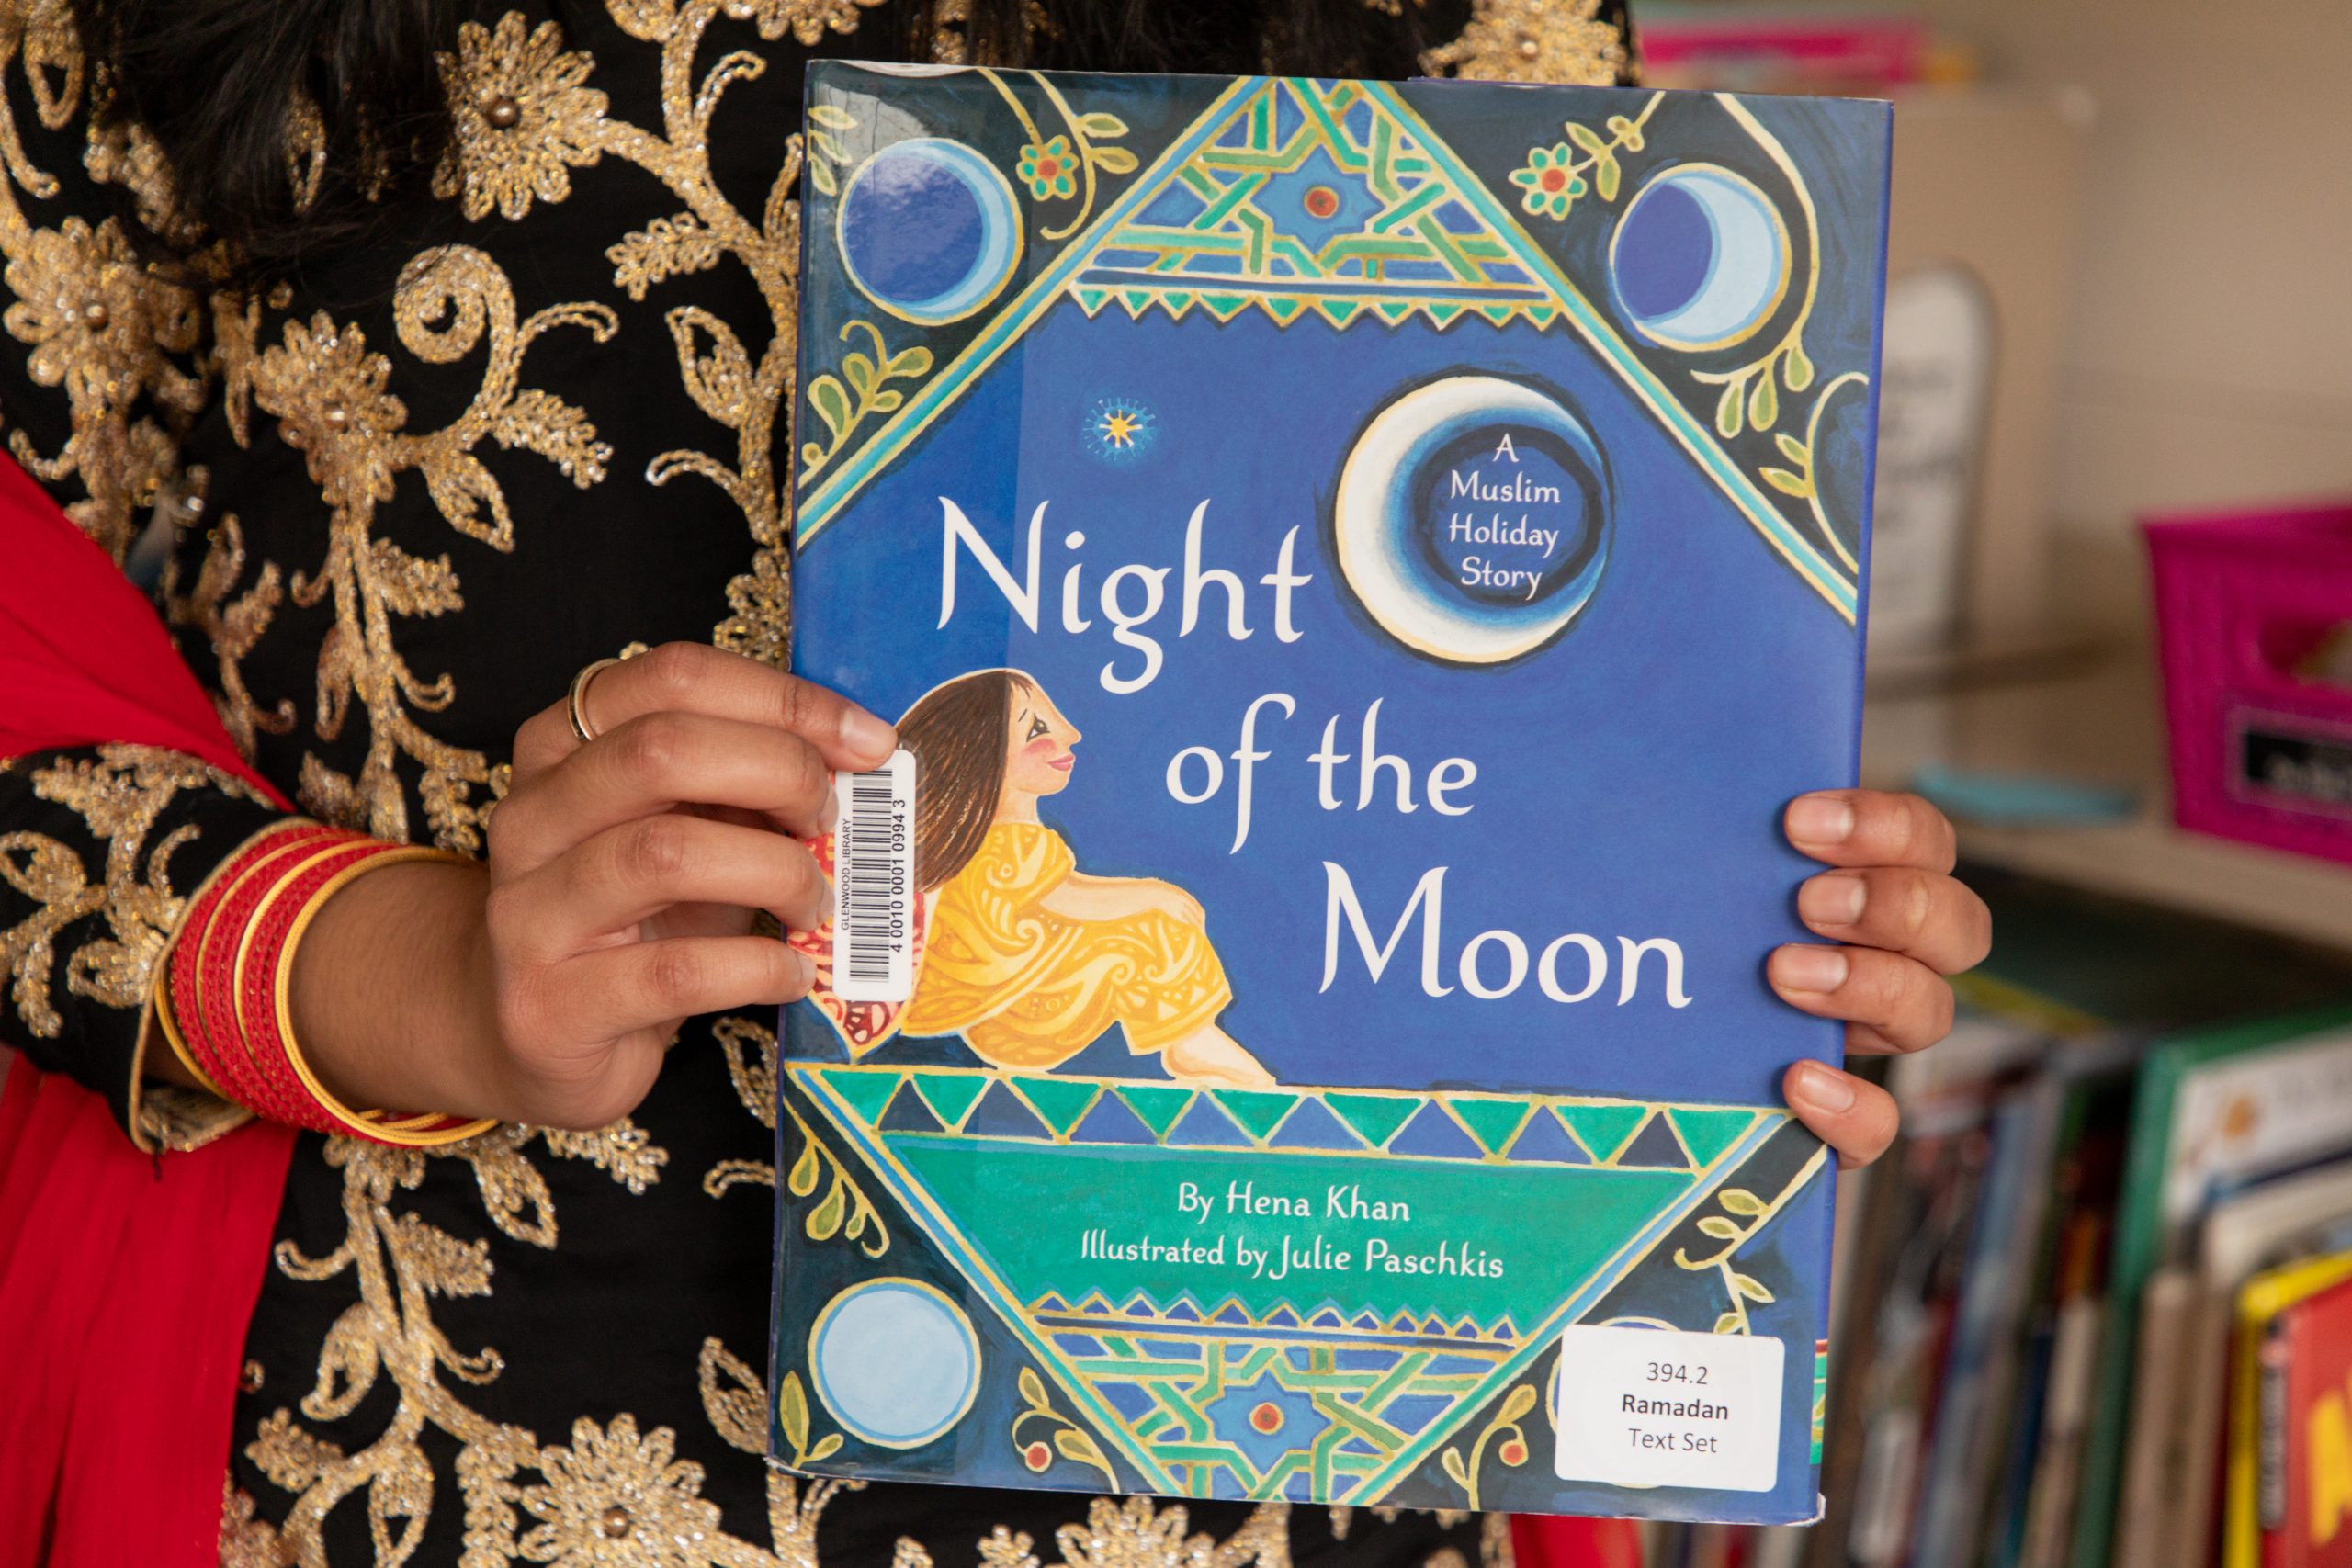 "Night of the Moon: A Muslim Holiday Story" by Hena Khan.